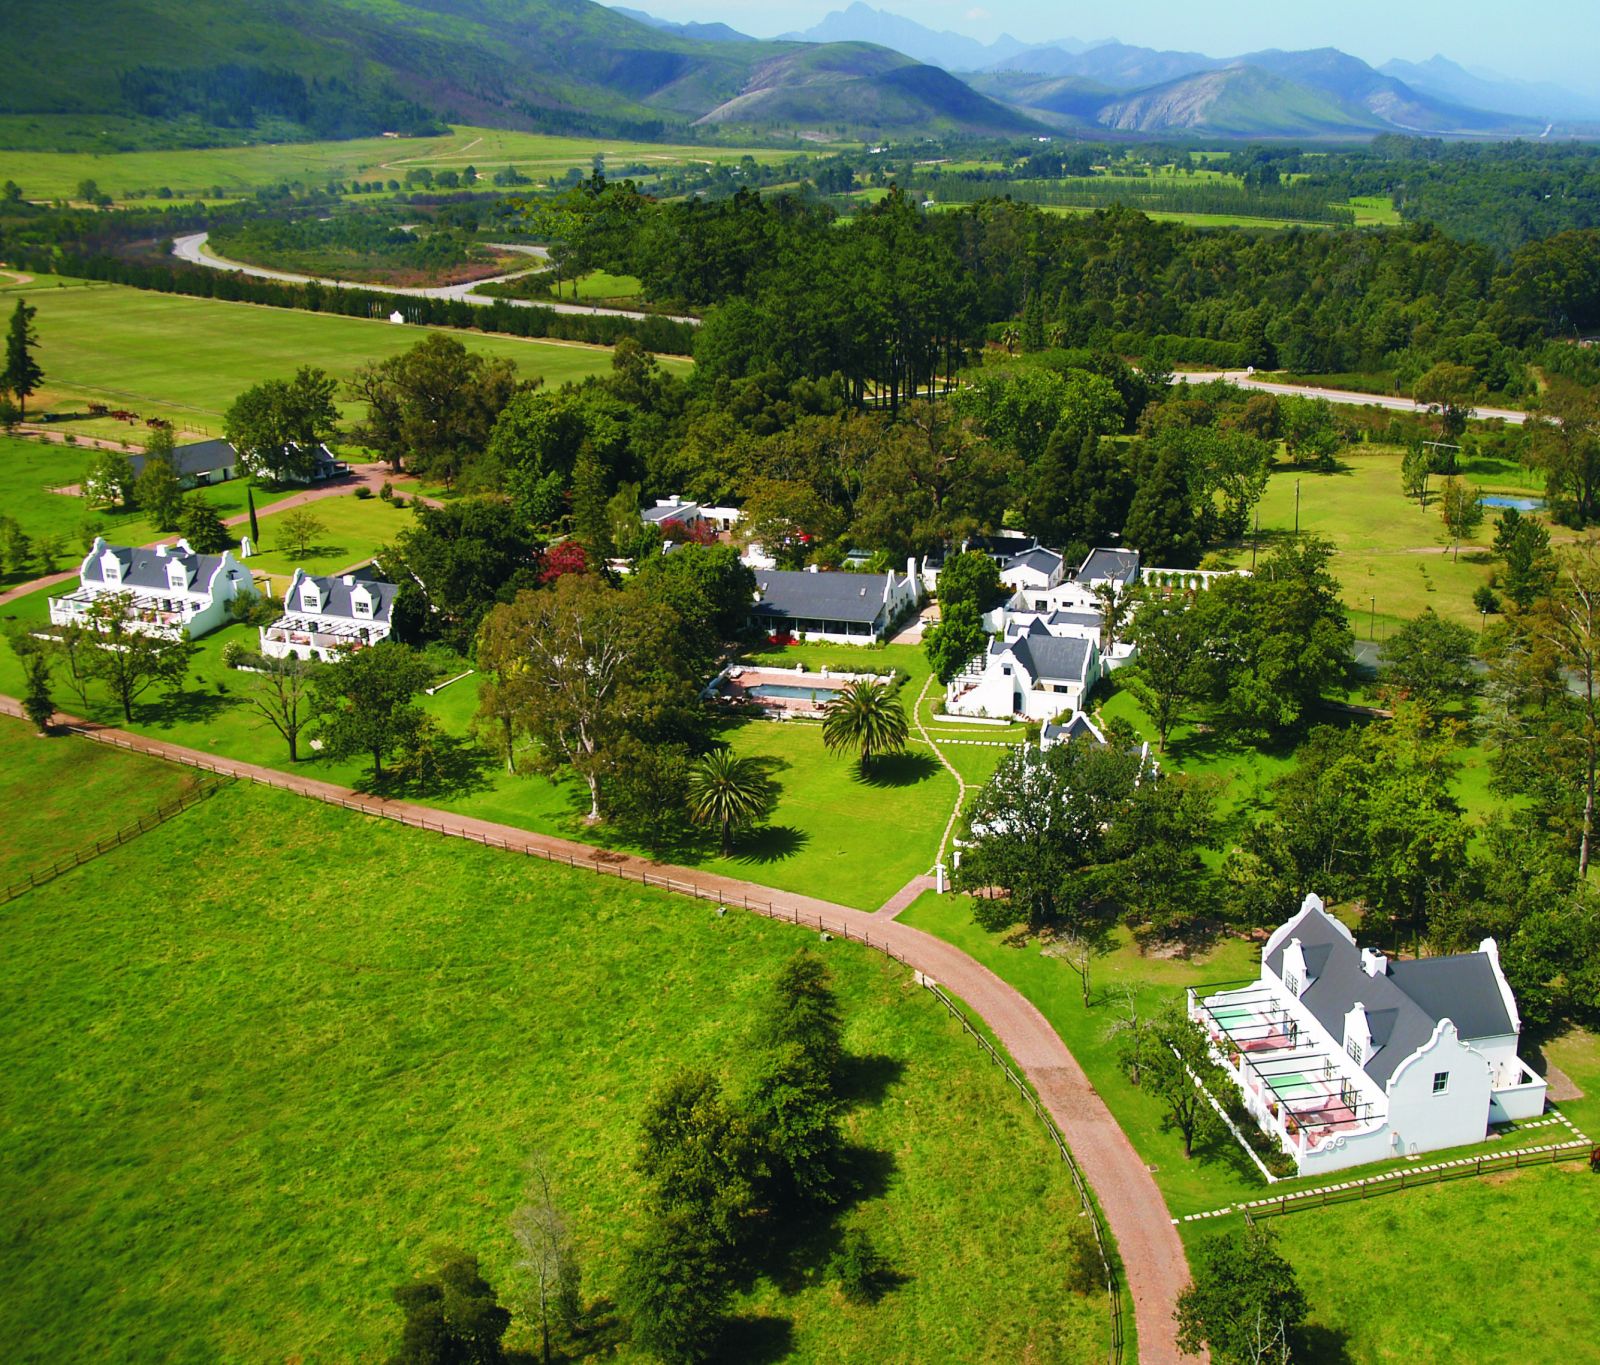 Birds eye view of Kurland in South Africa